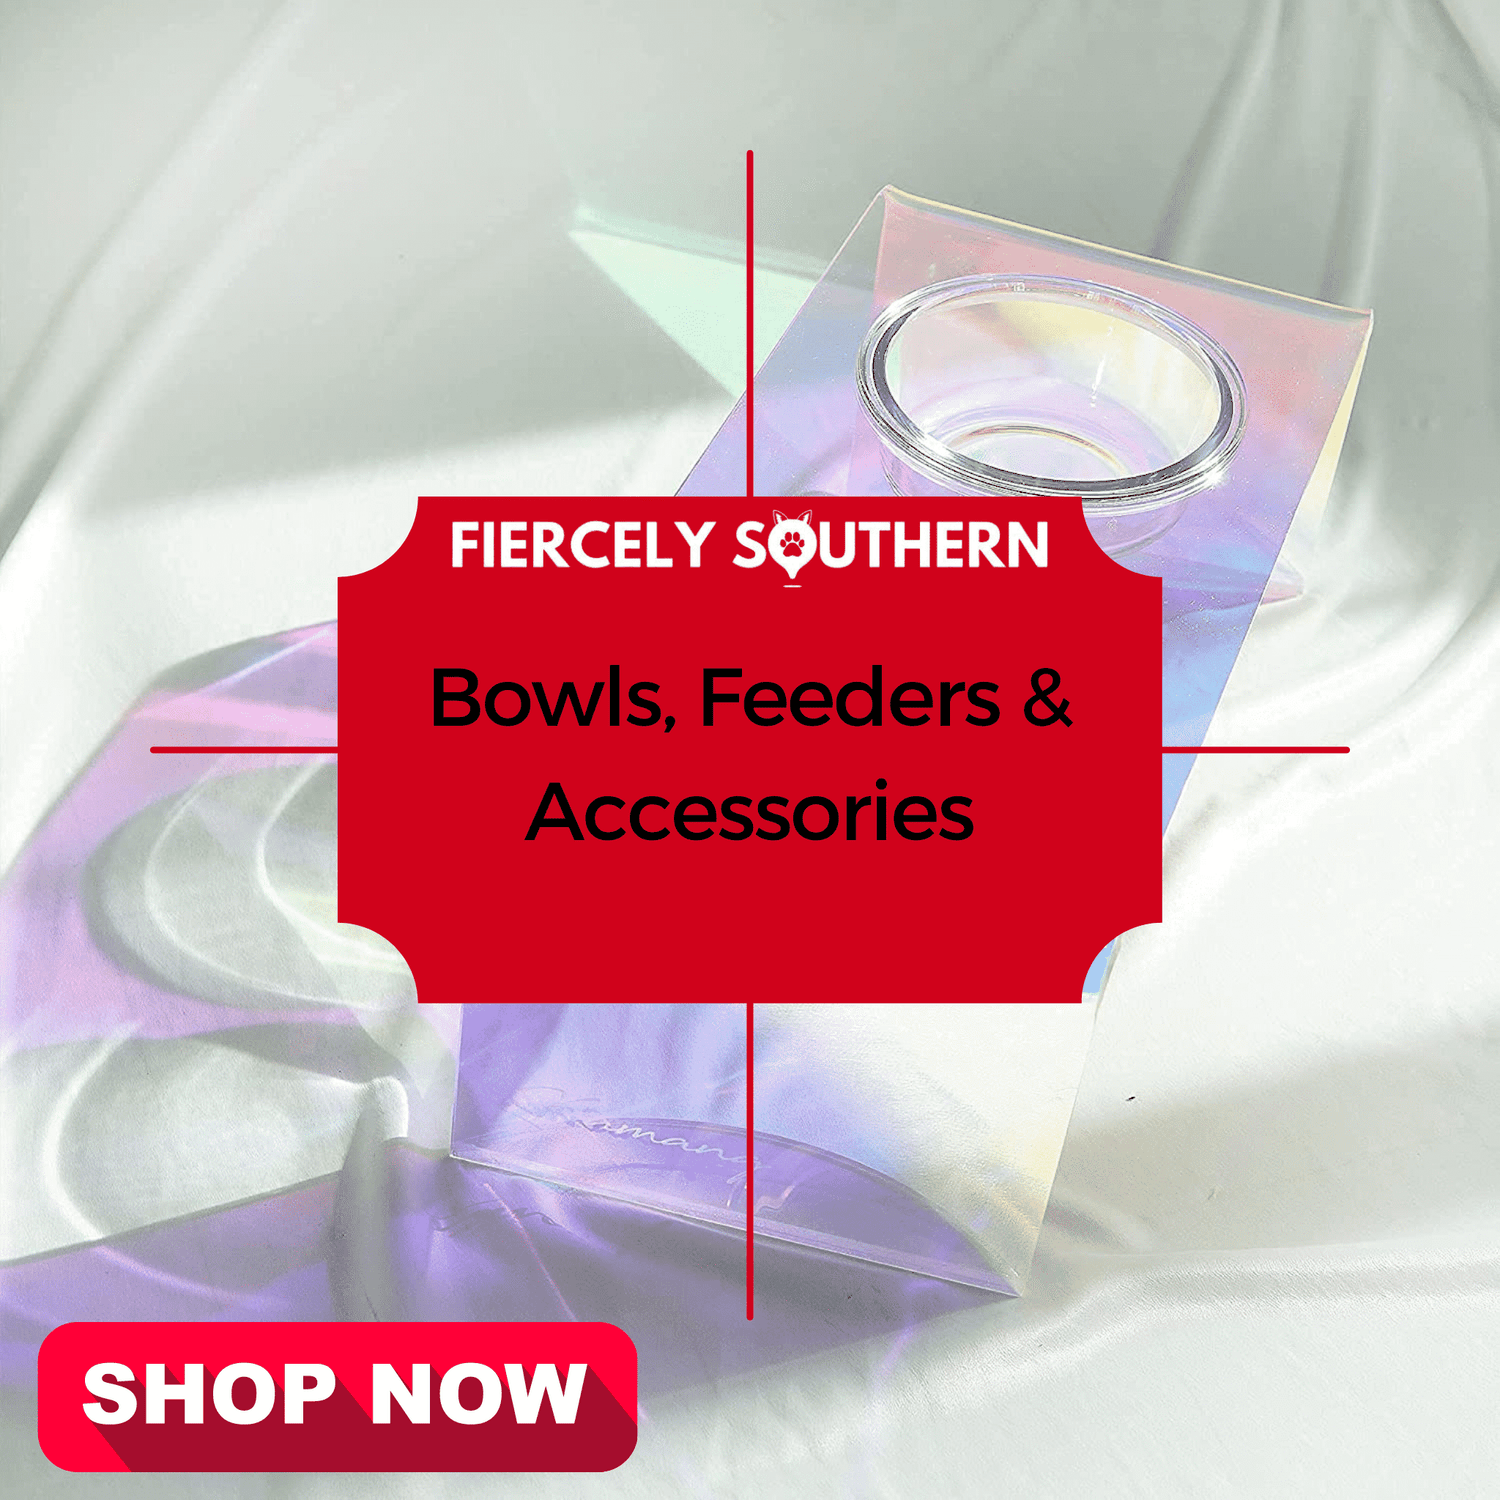 Bowls, Feeders & Accessories - Fiercely Southern